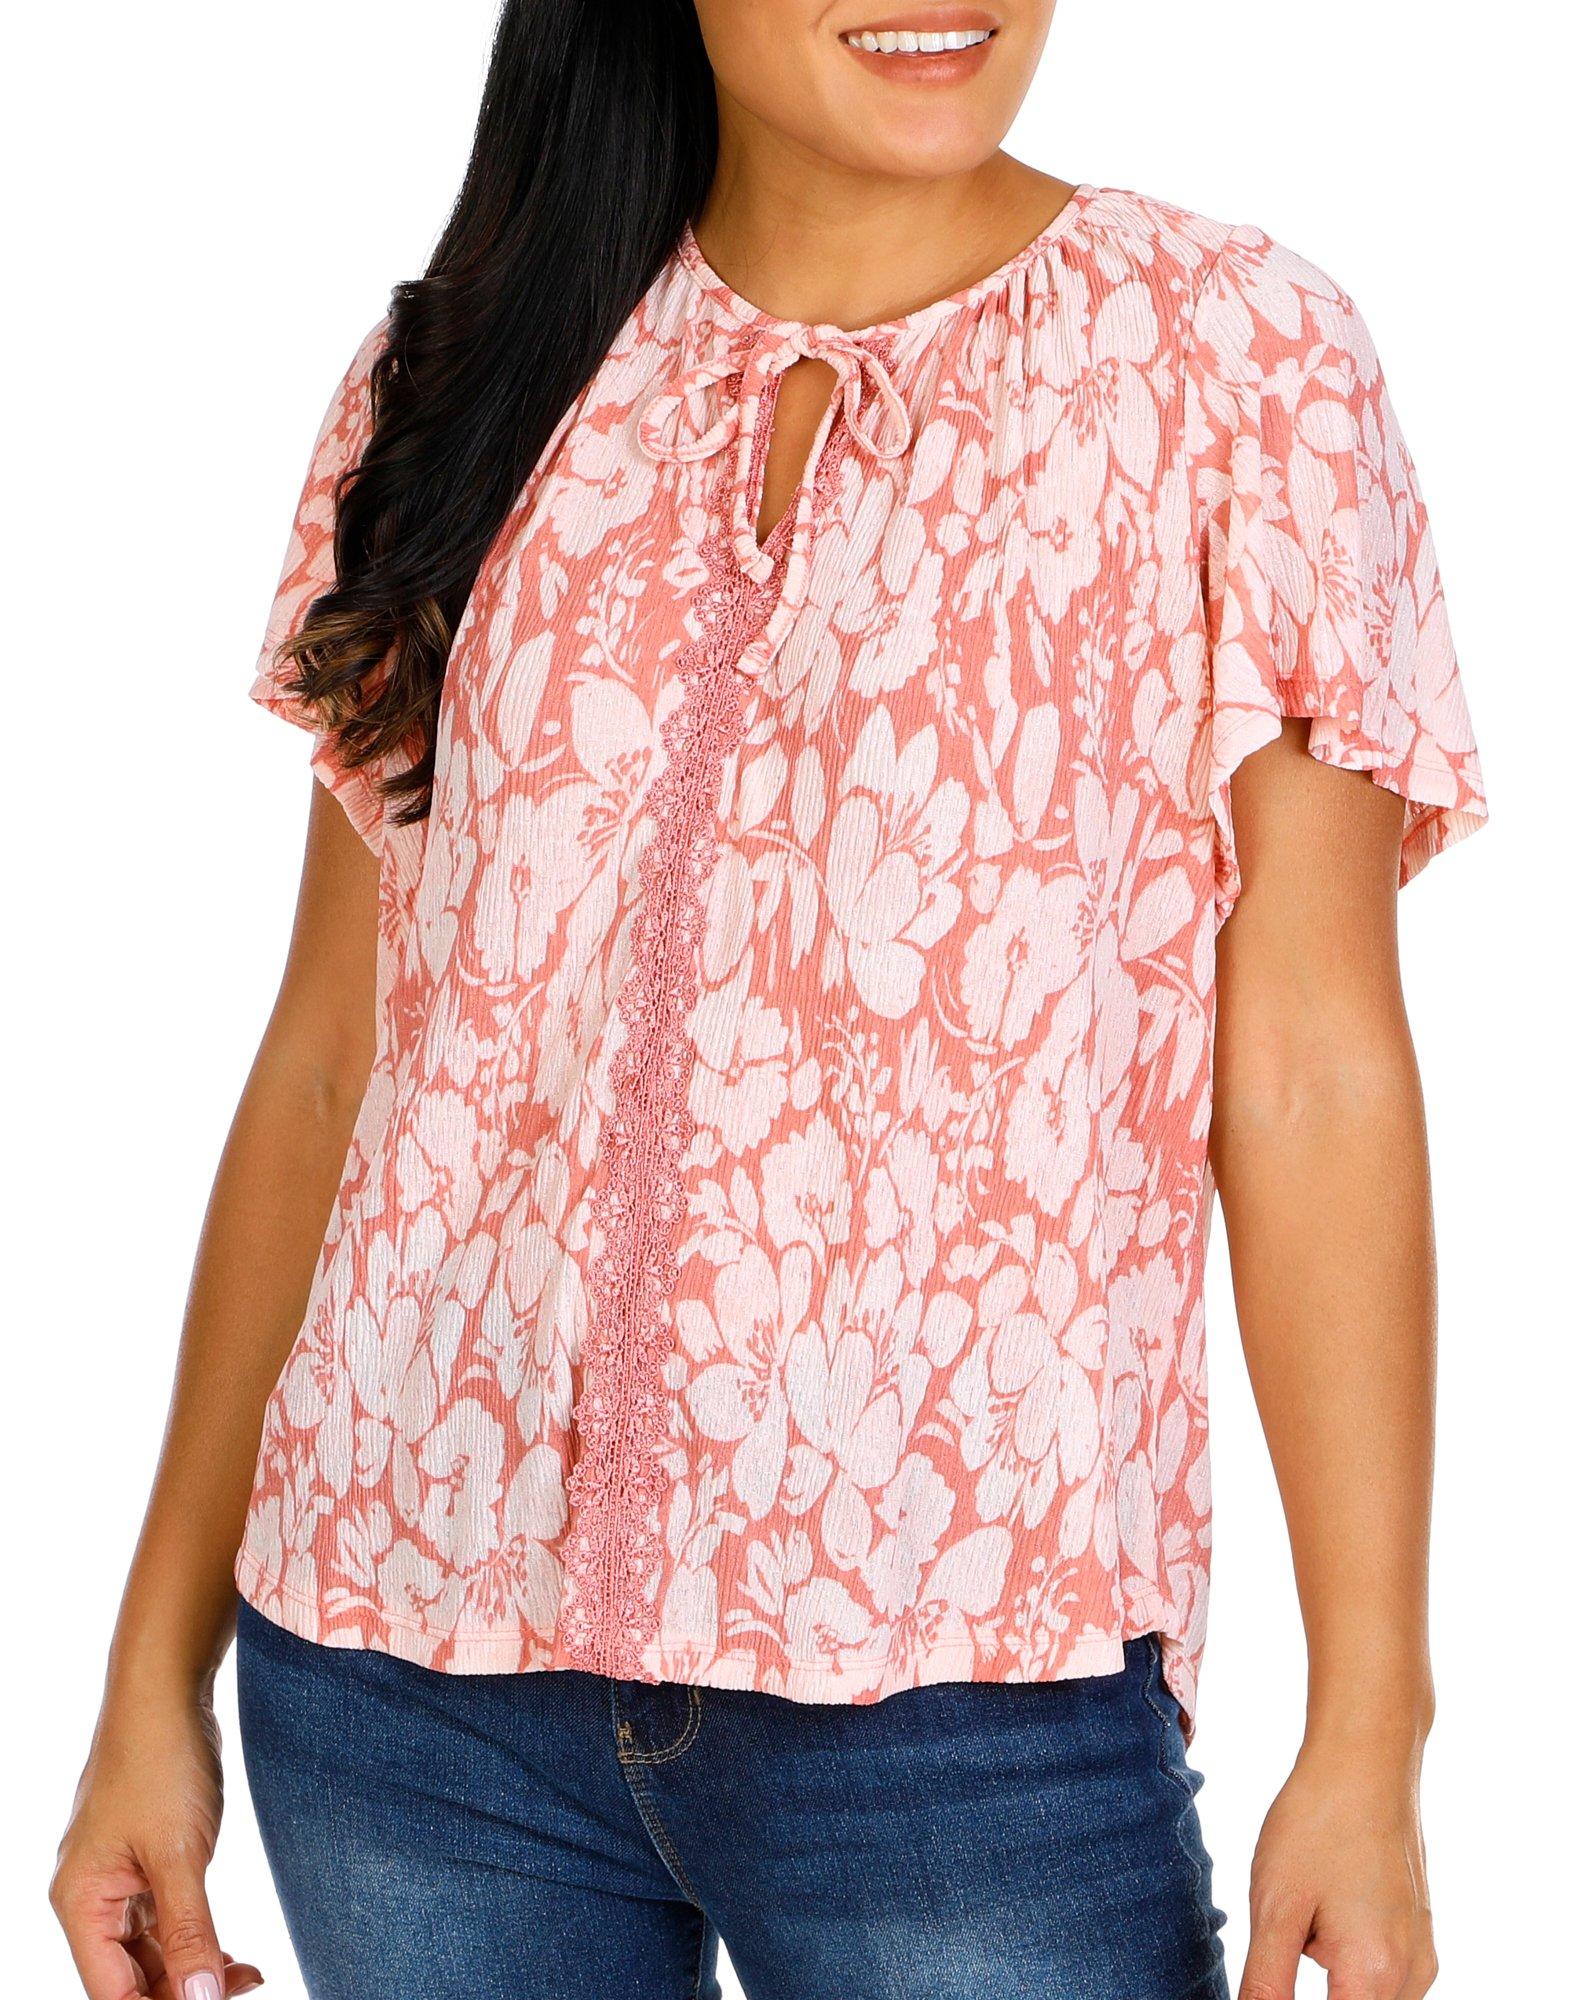 Women's Floral Print Pleated Top